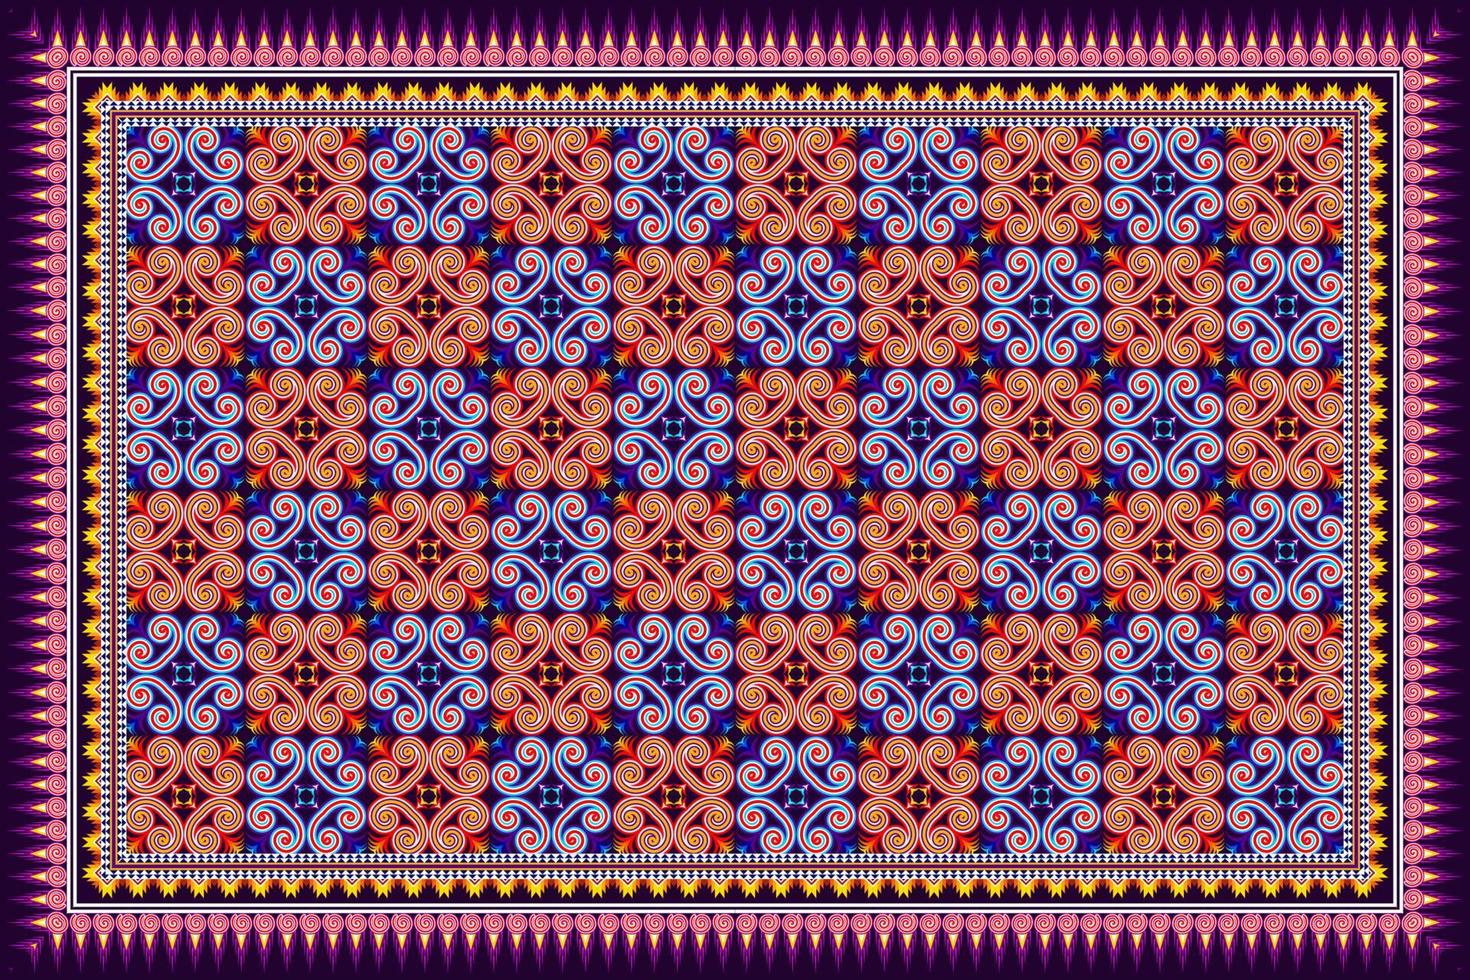 Ikat ethnic seamless pattern design abstract geometric Aztec fabric carpet ornament chevron textile decoration wallpaper. Tribal turkey African Indian American traditional embroidery vector